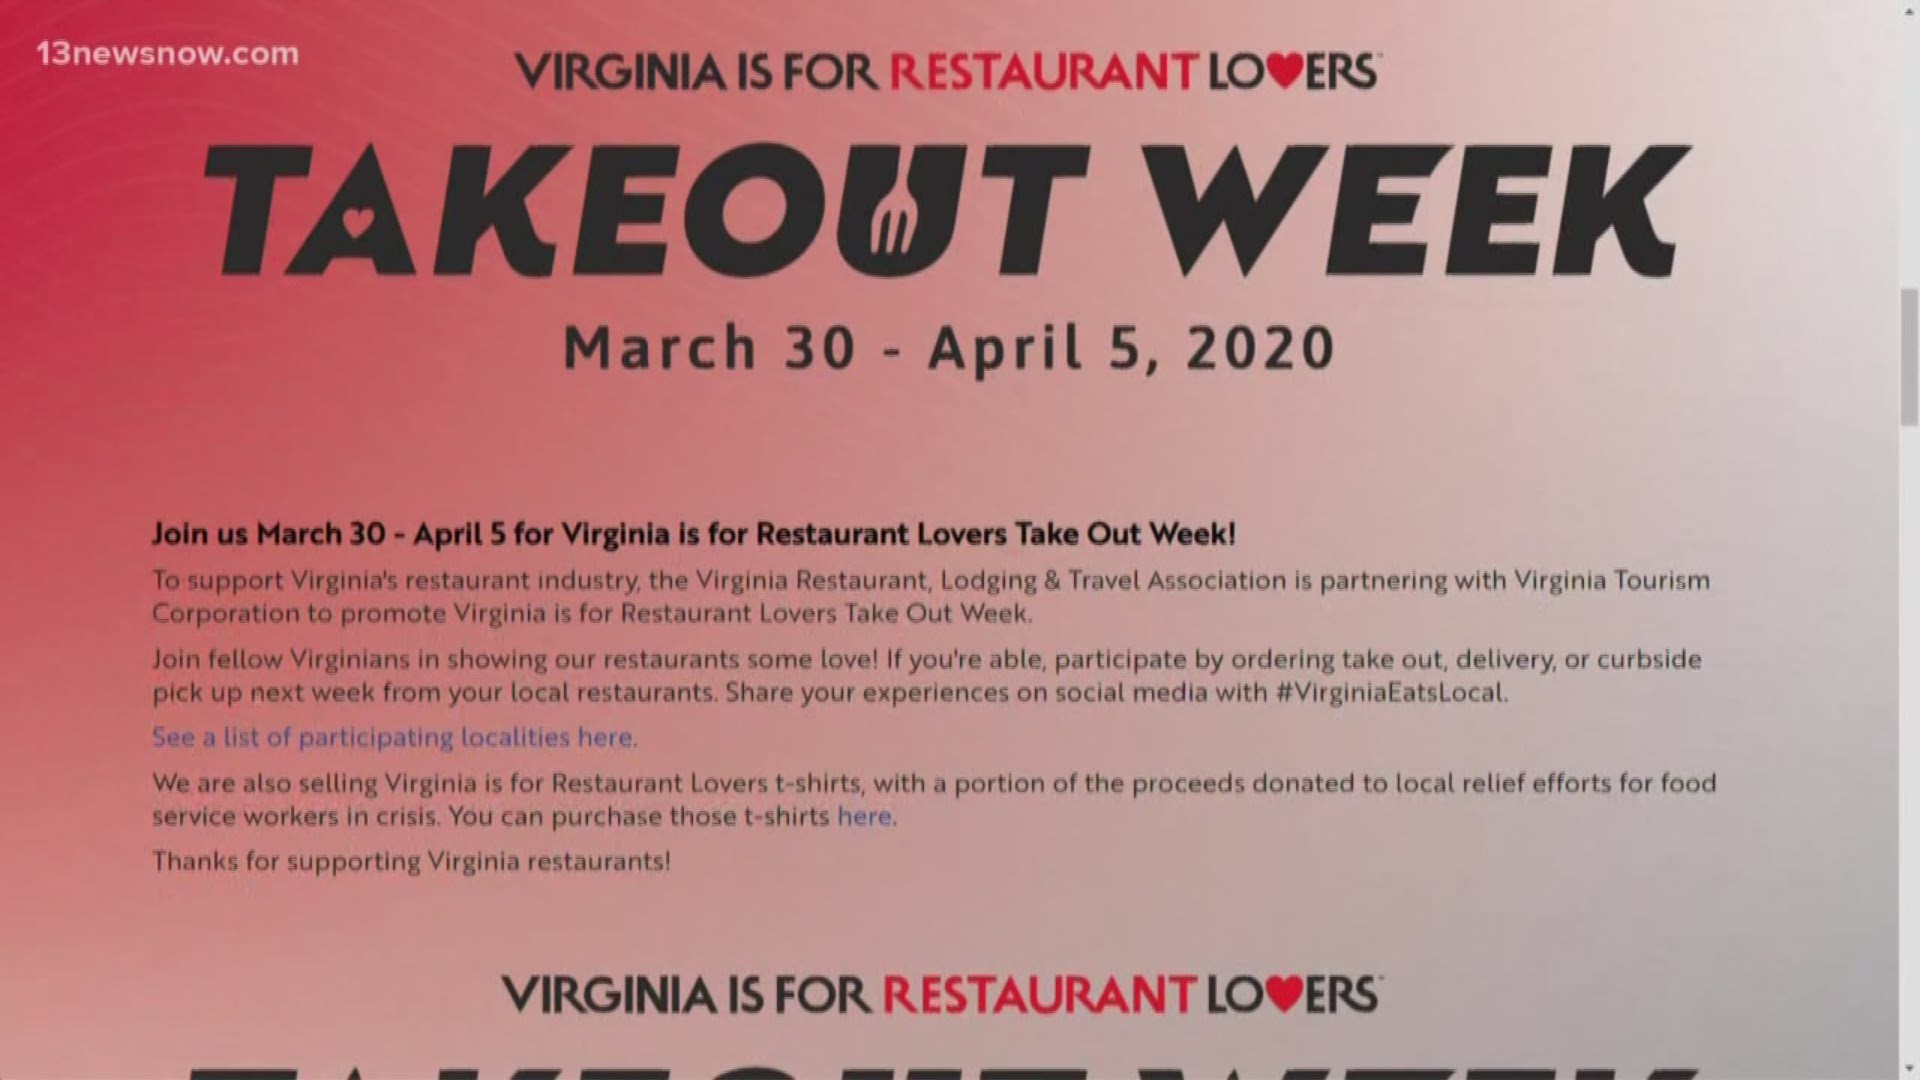 The Virginia is for Lovers Restaurant Takeout Week runs from March 30 - April 5, 2020.